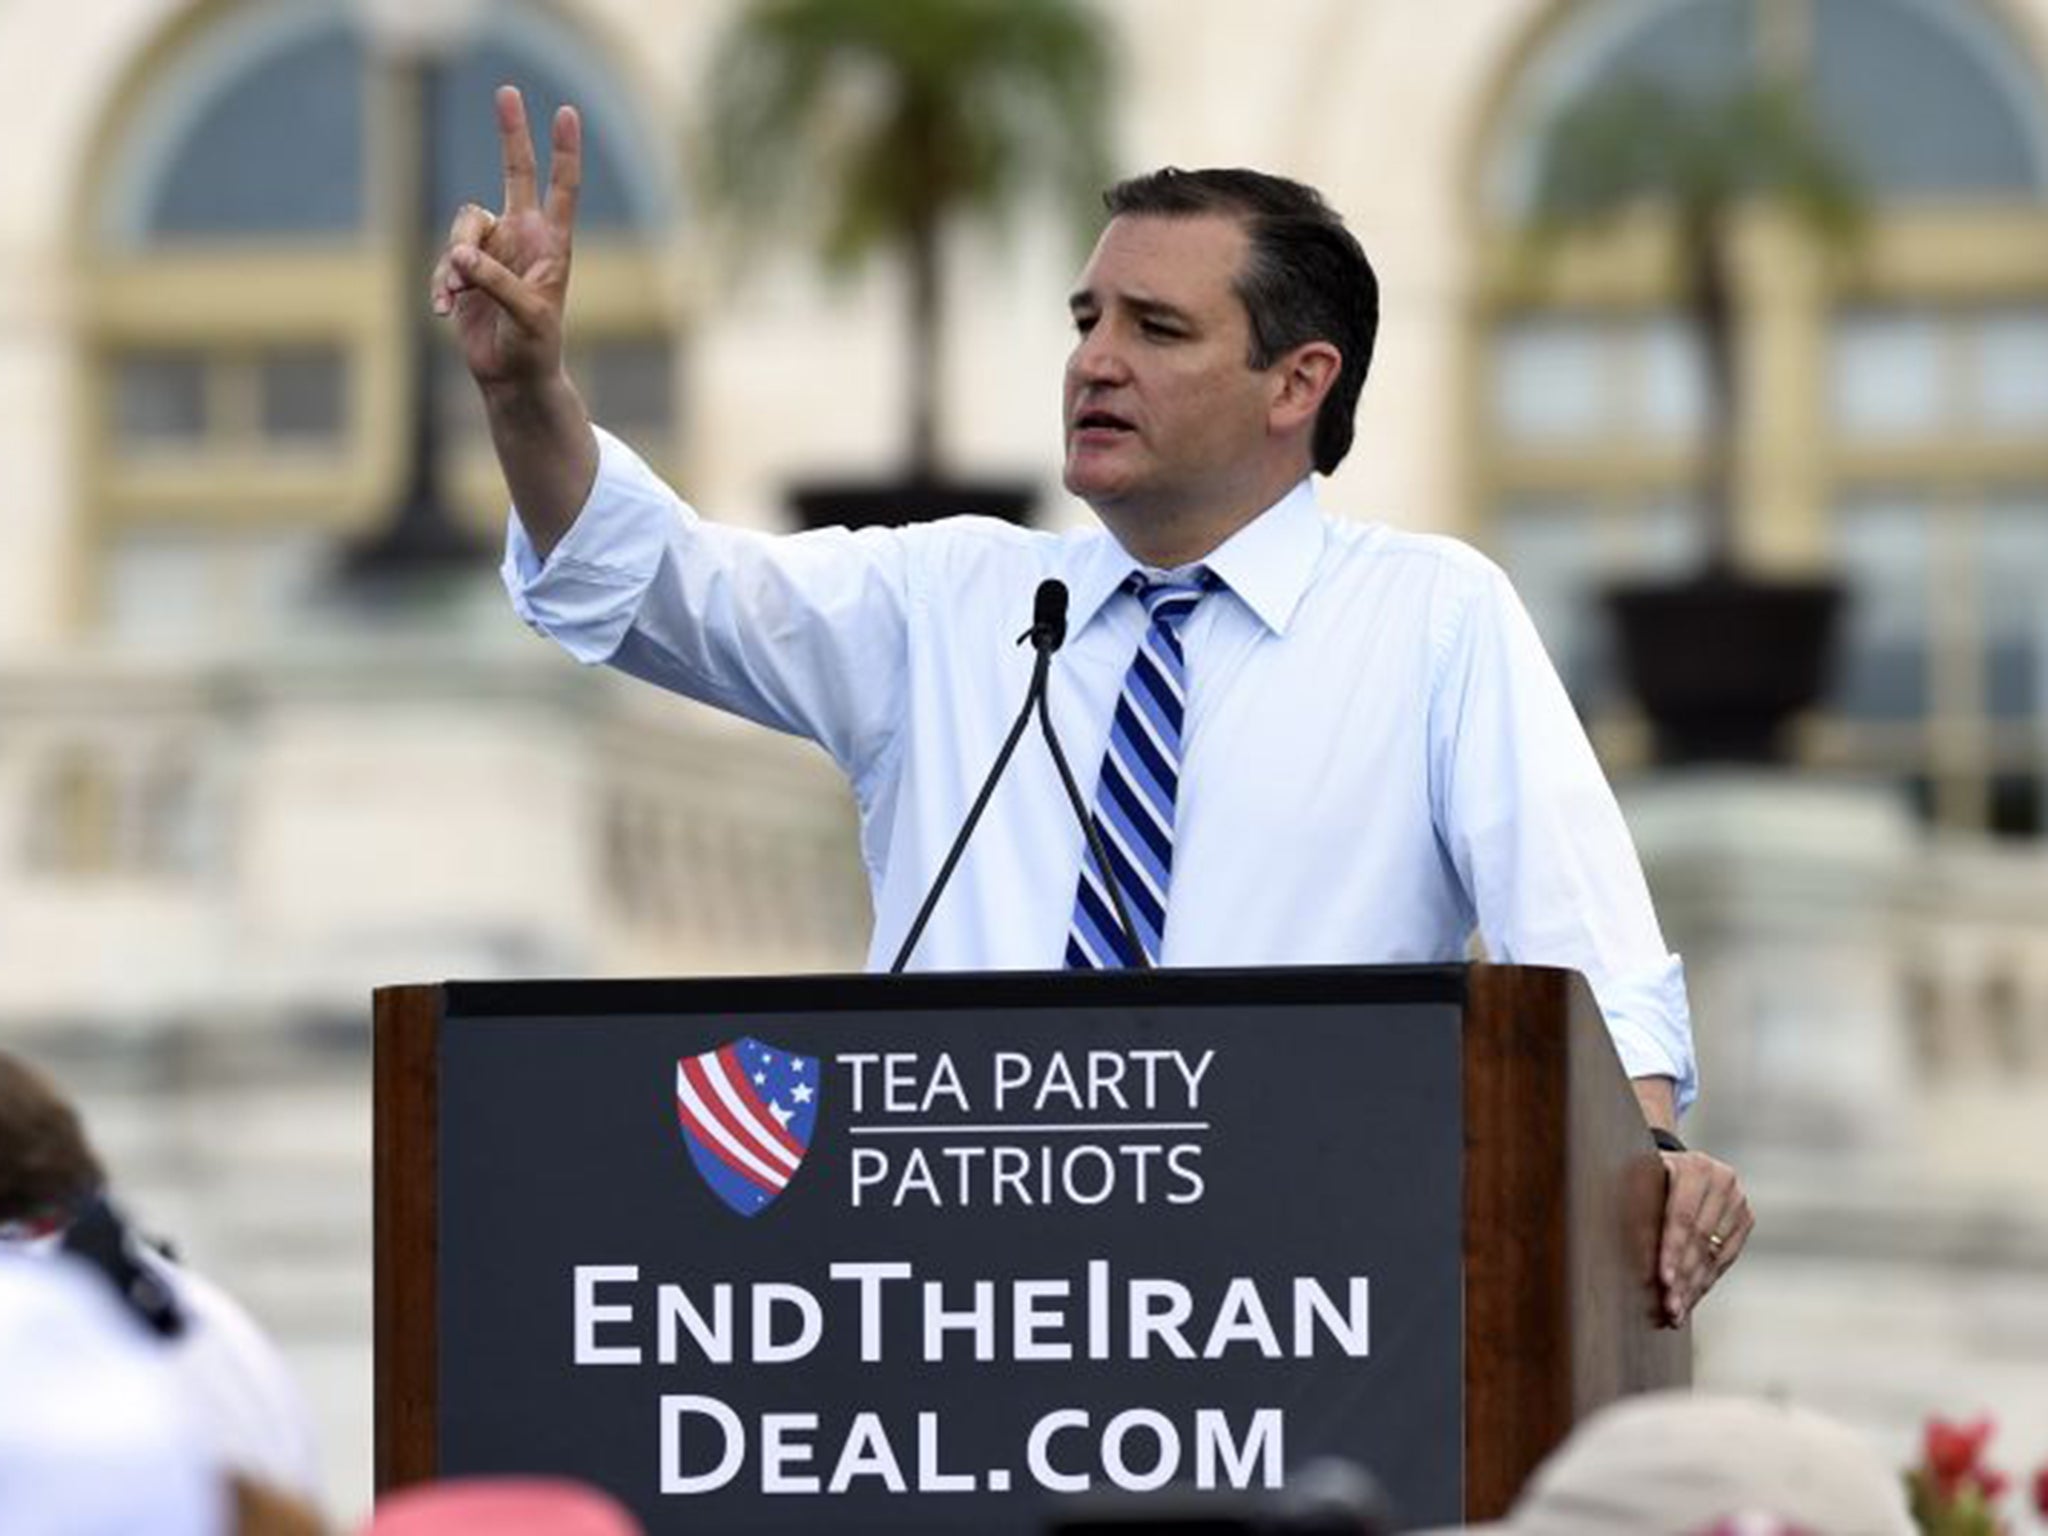 Republican presidential candidate Ted Cruz has received a $15m donation from Texan billionaire brothers